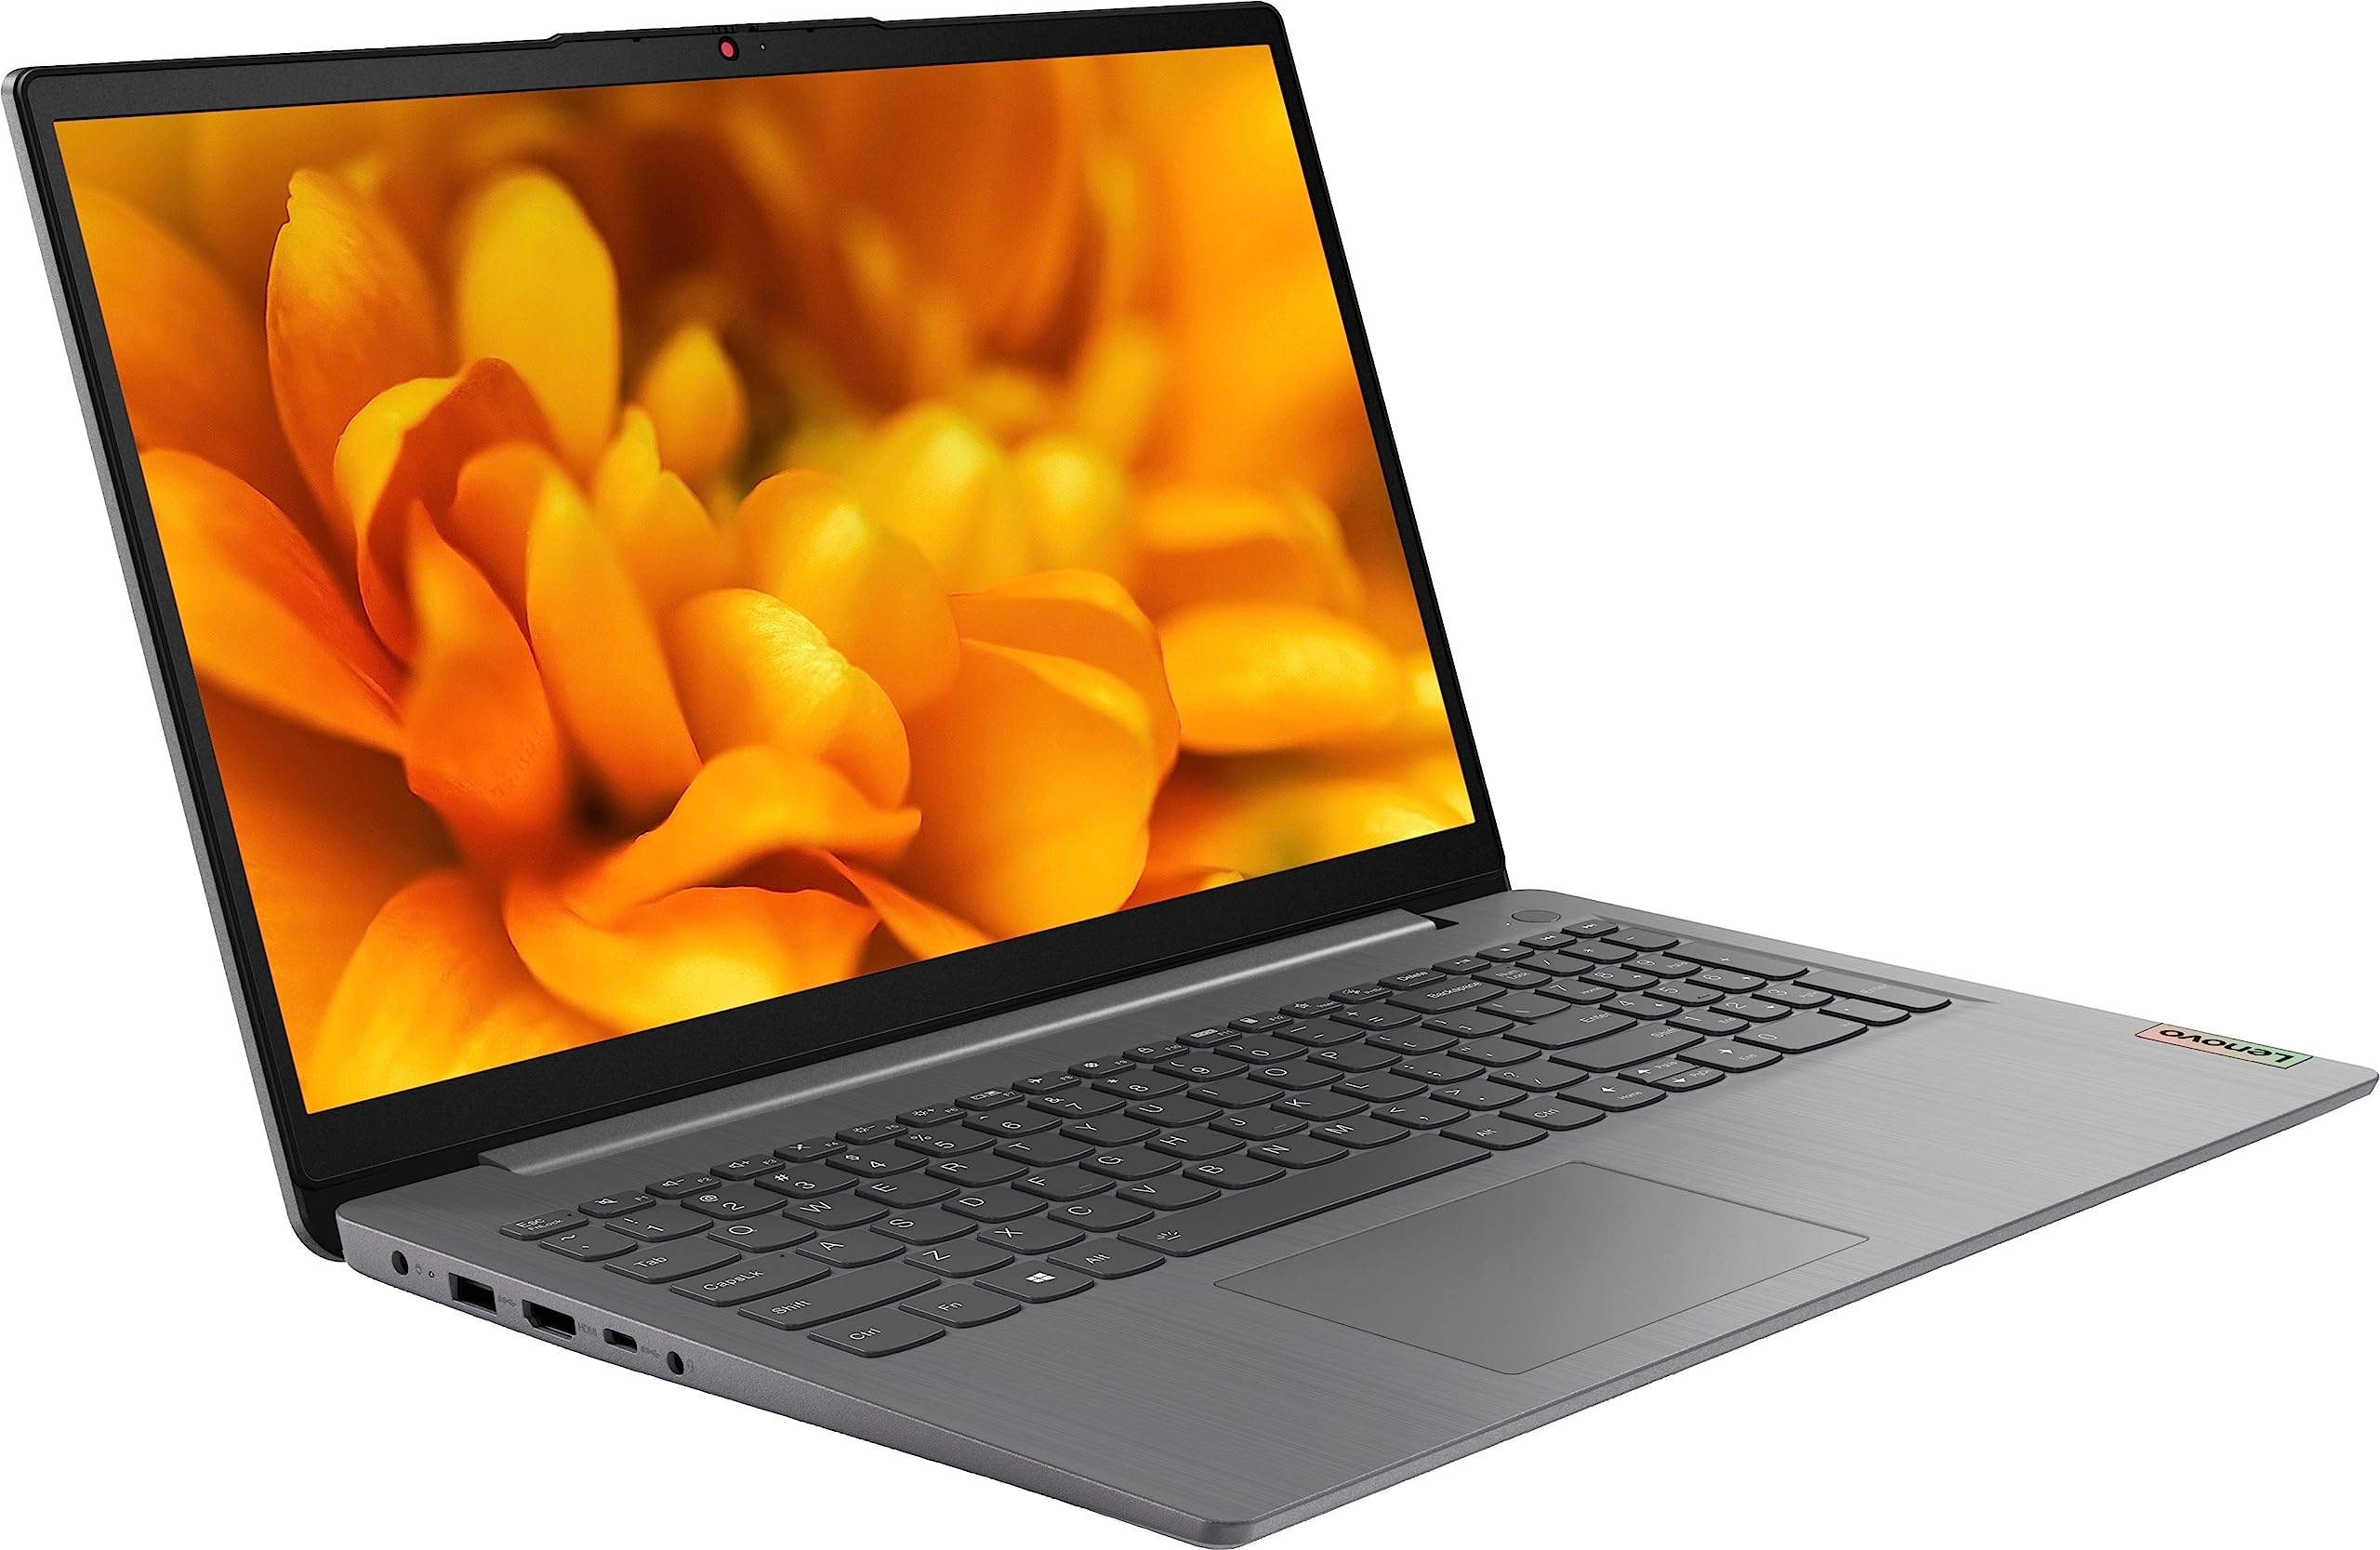 Lenovo 2023 Newest Ideapad 3i Laptop, 15.6" FHD IPS Touchscreen, Intel 4-Core i5-1135G7 Processor (Up to 4.2 GHz), 36GB RAM, 1TB SSD, Intel Iris Xe Graphics, Wi-Fi 6, Windows 11 Home in S Mode